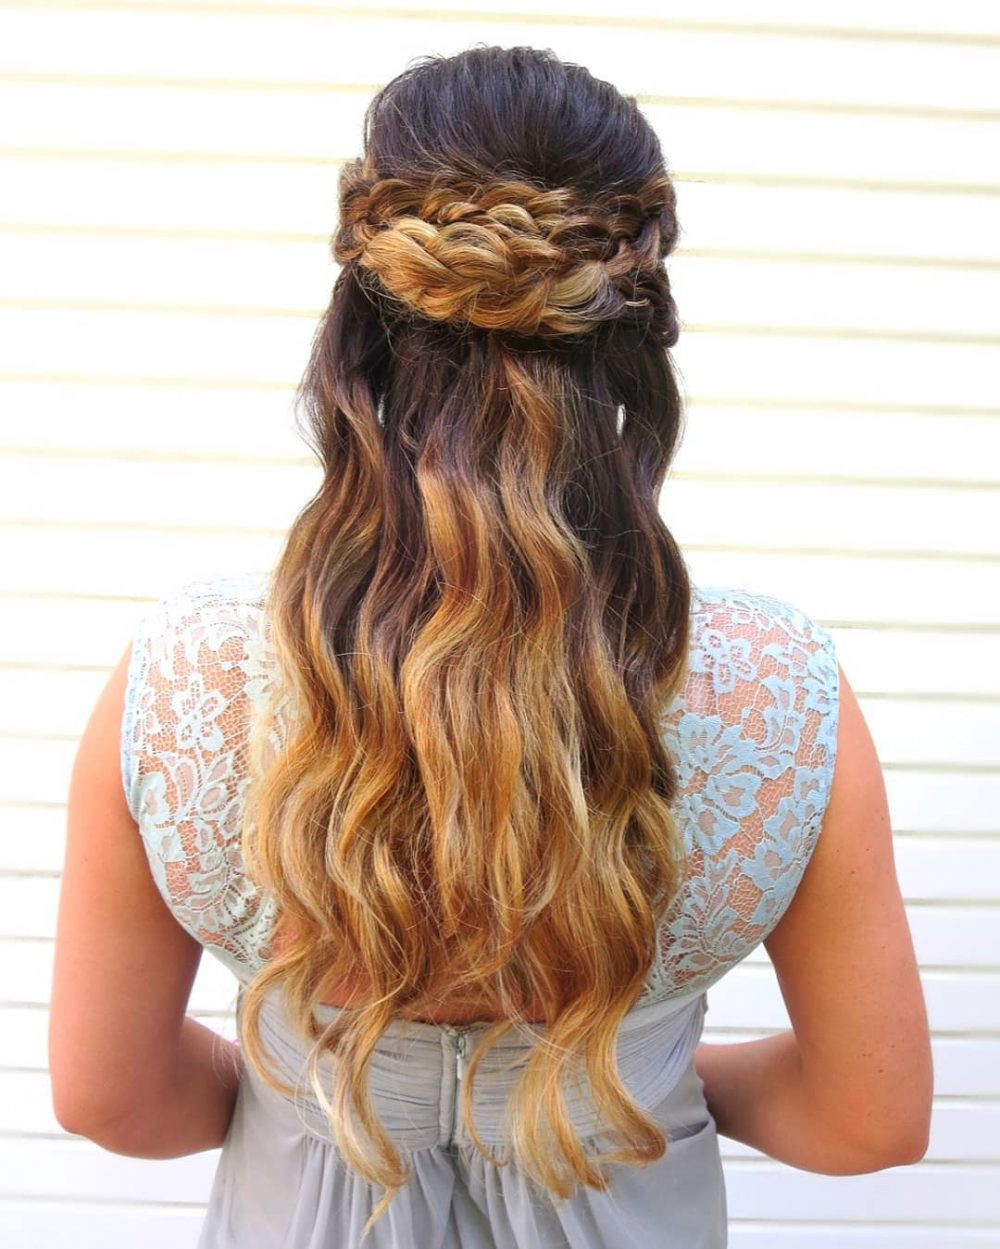 Hairstyles For Prom Half Up Half Down
 27 Prettiest Half Up Half Down Prom Hairstyles for 2020